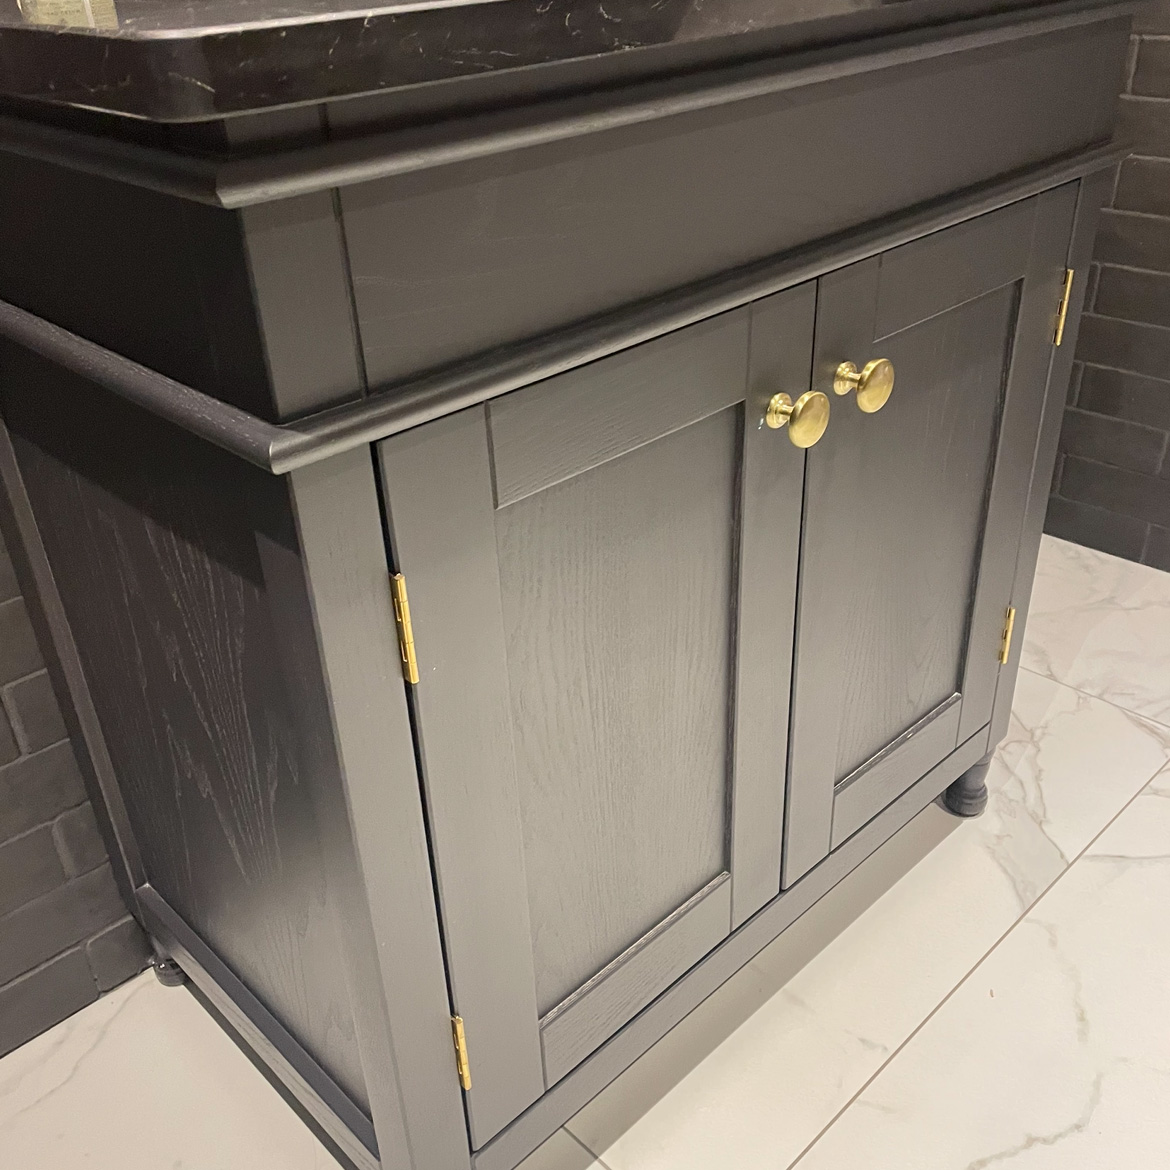 Black under sink cabinet with gold accents